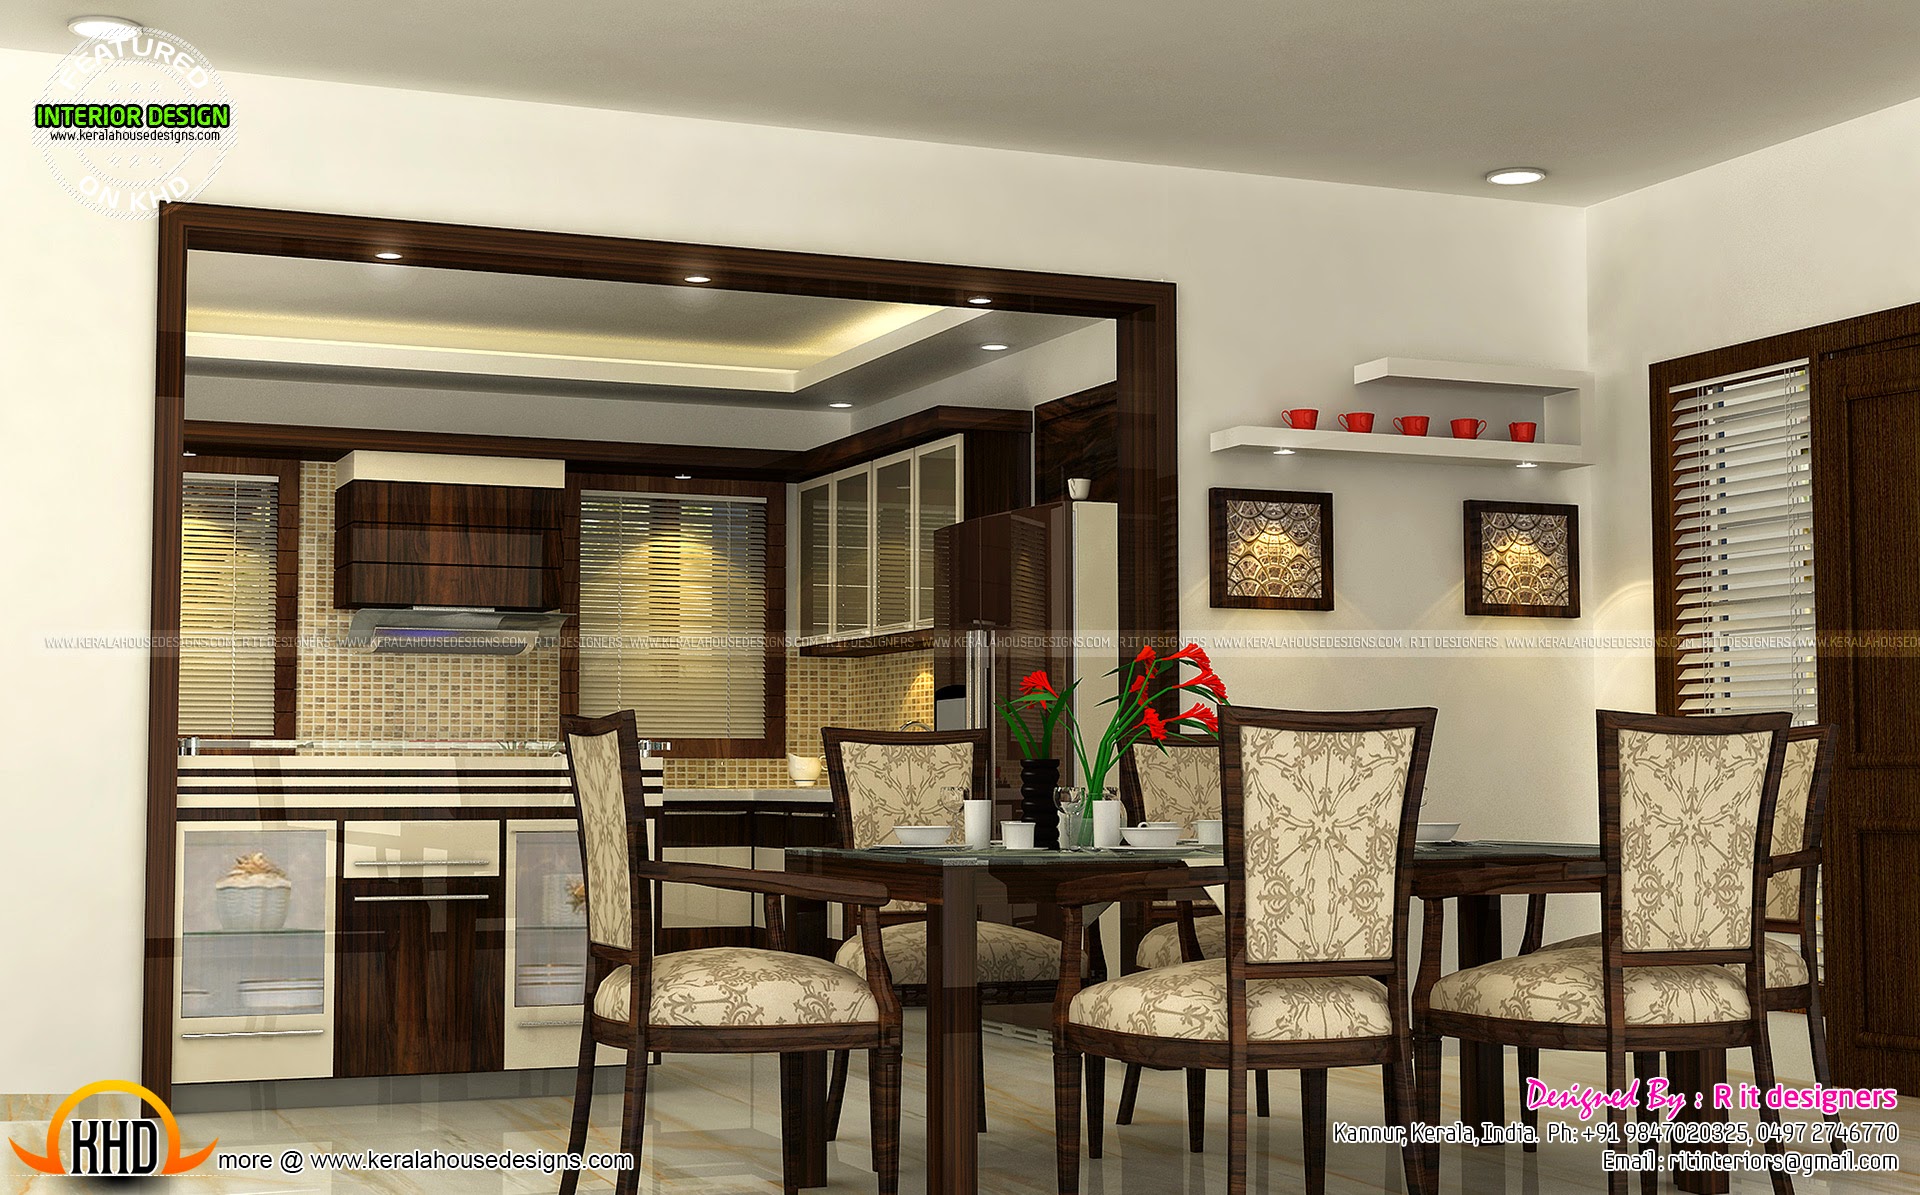 Kerala interior design with cost - Kerala home design and floor plans